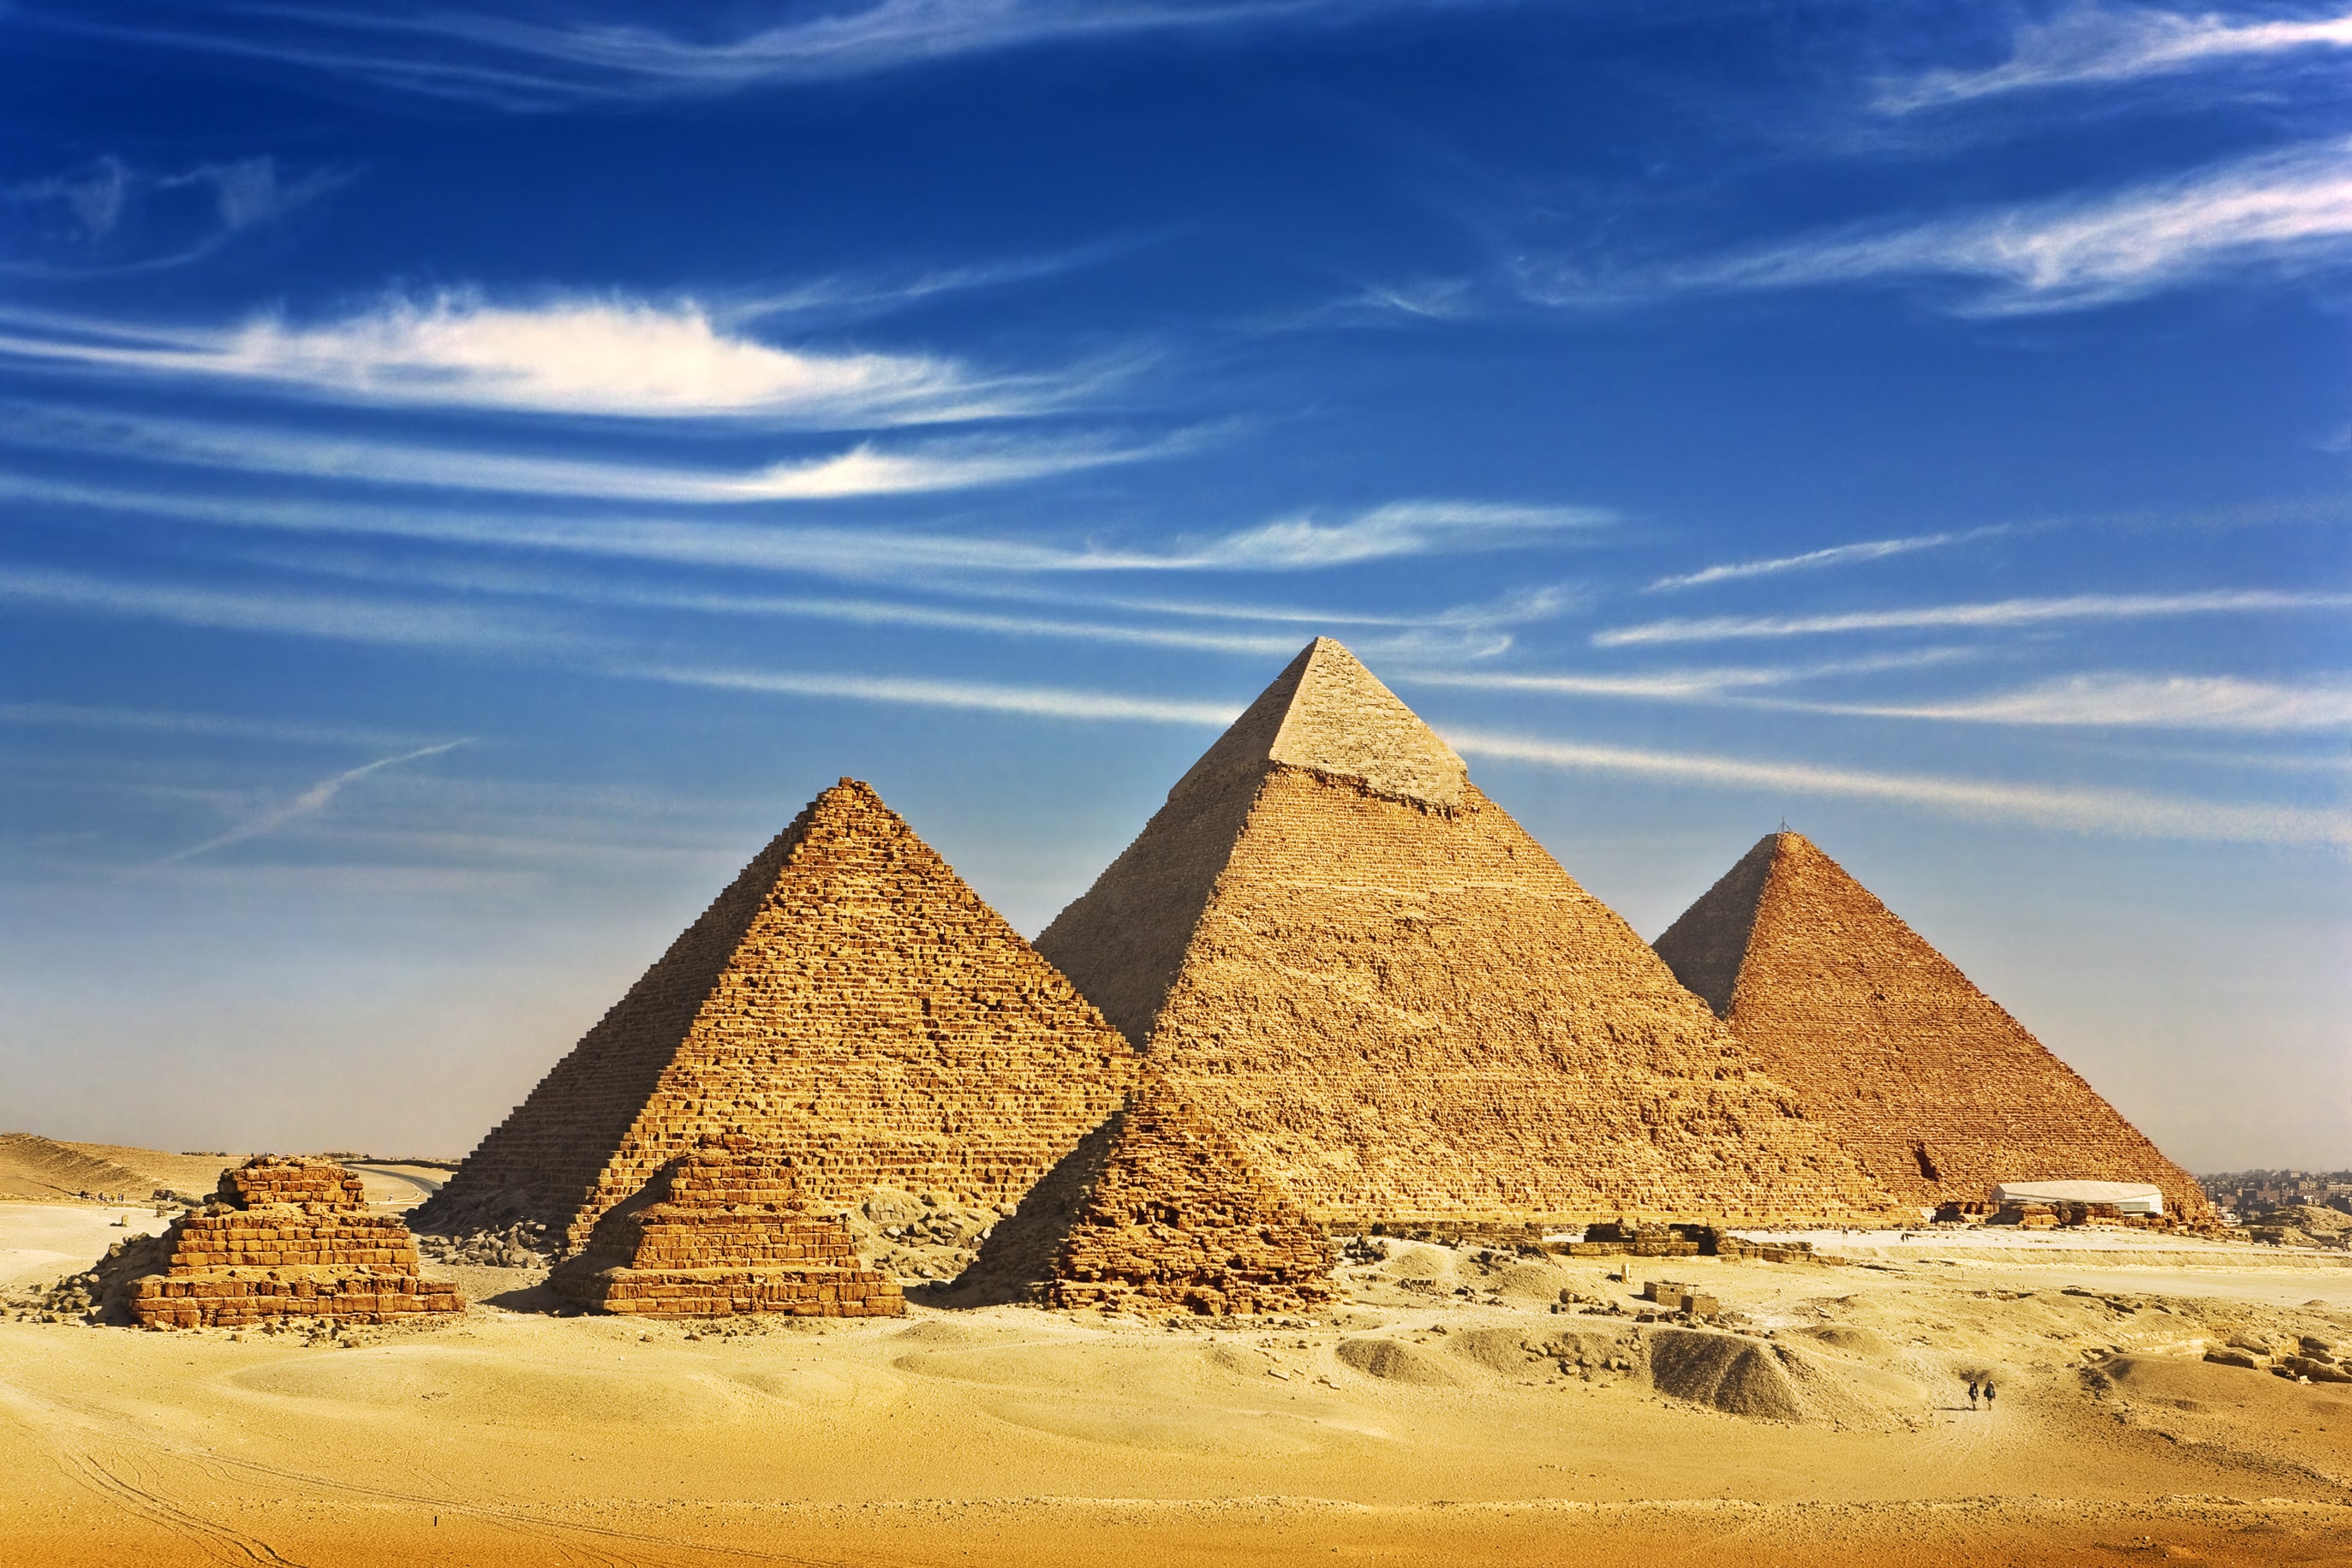 How were the Pyramids really built?